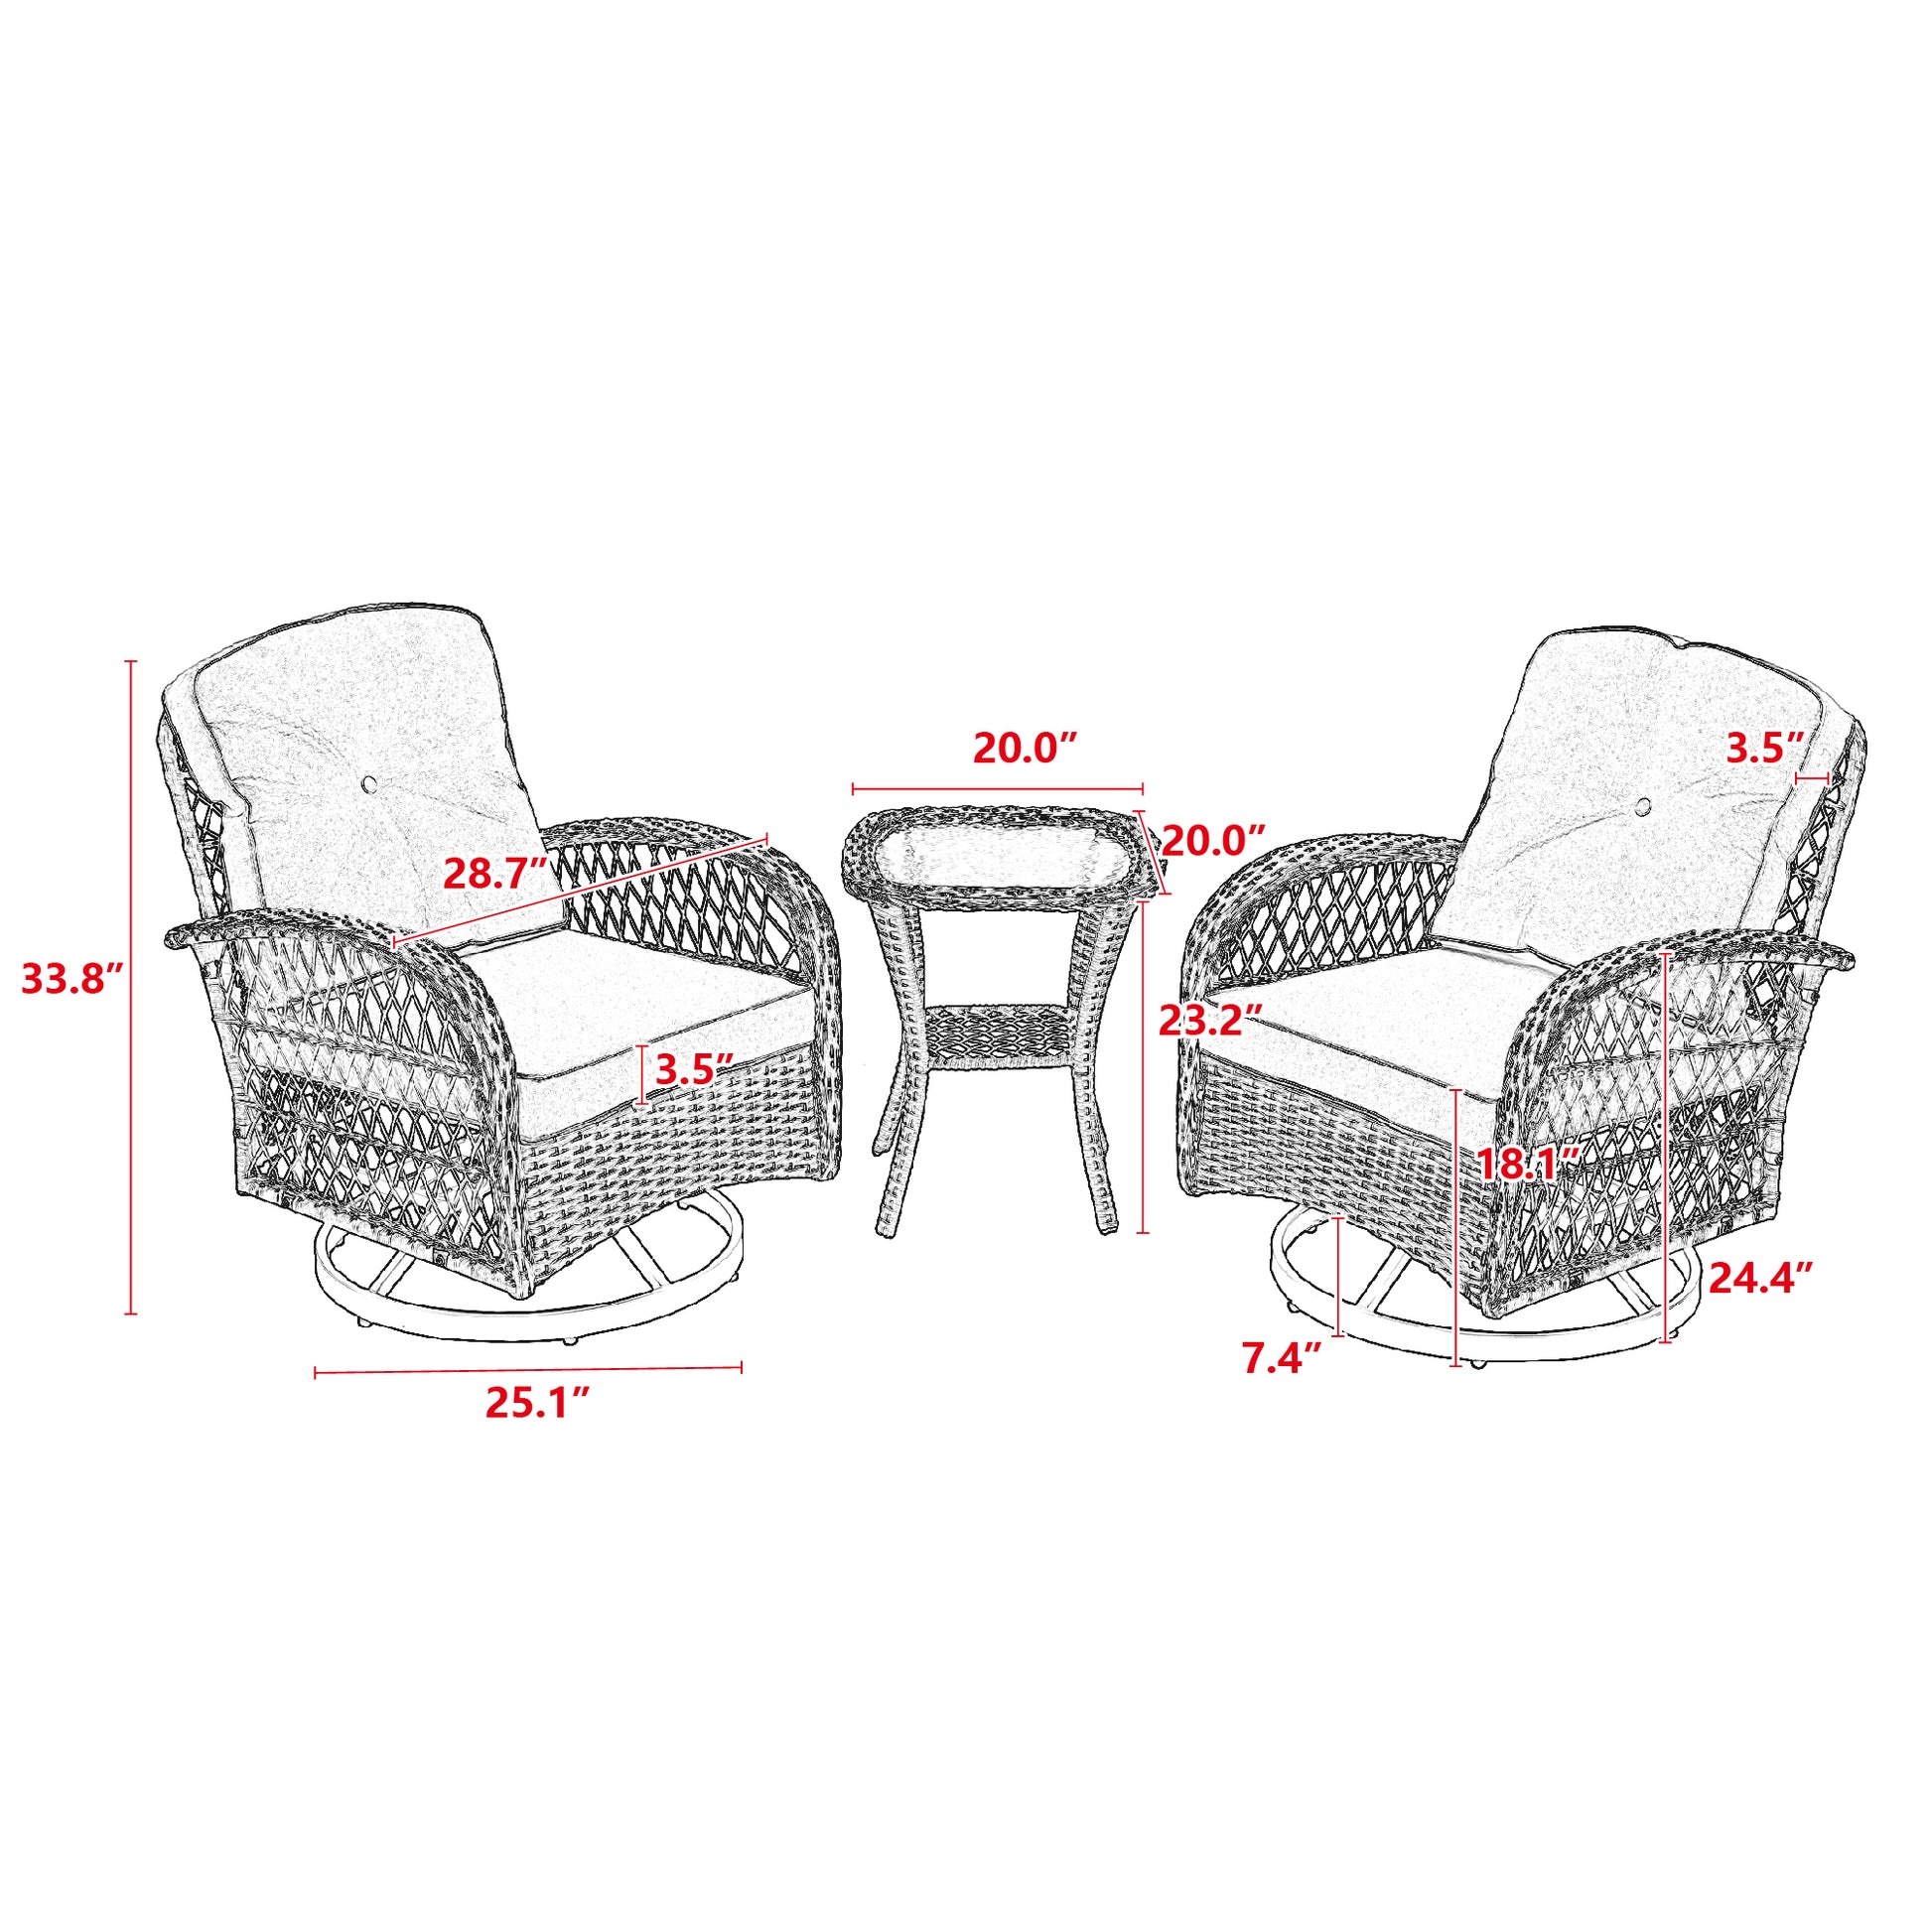 3 Pieces Outdoor Patio Chairs, 360 Degree Rocking